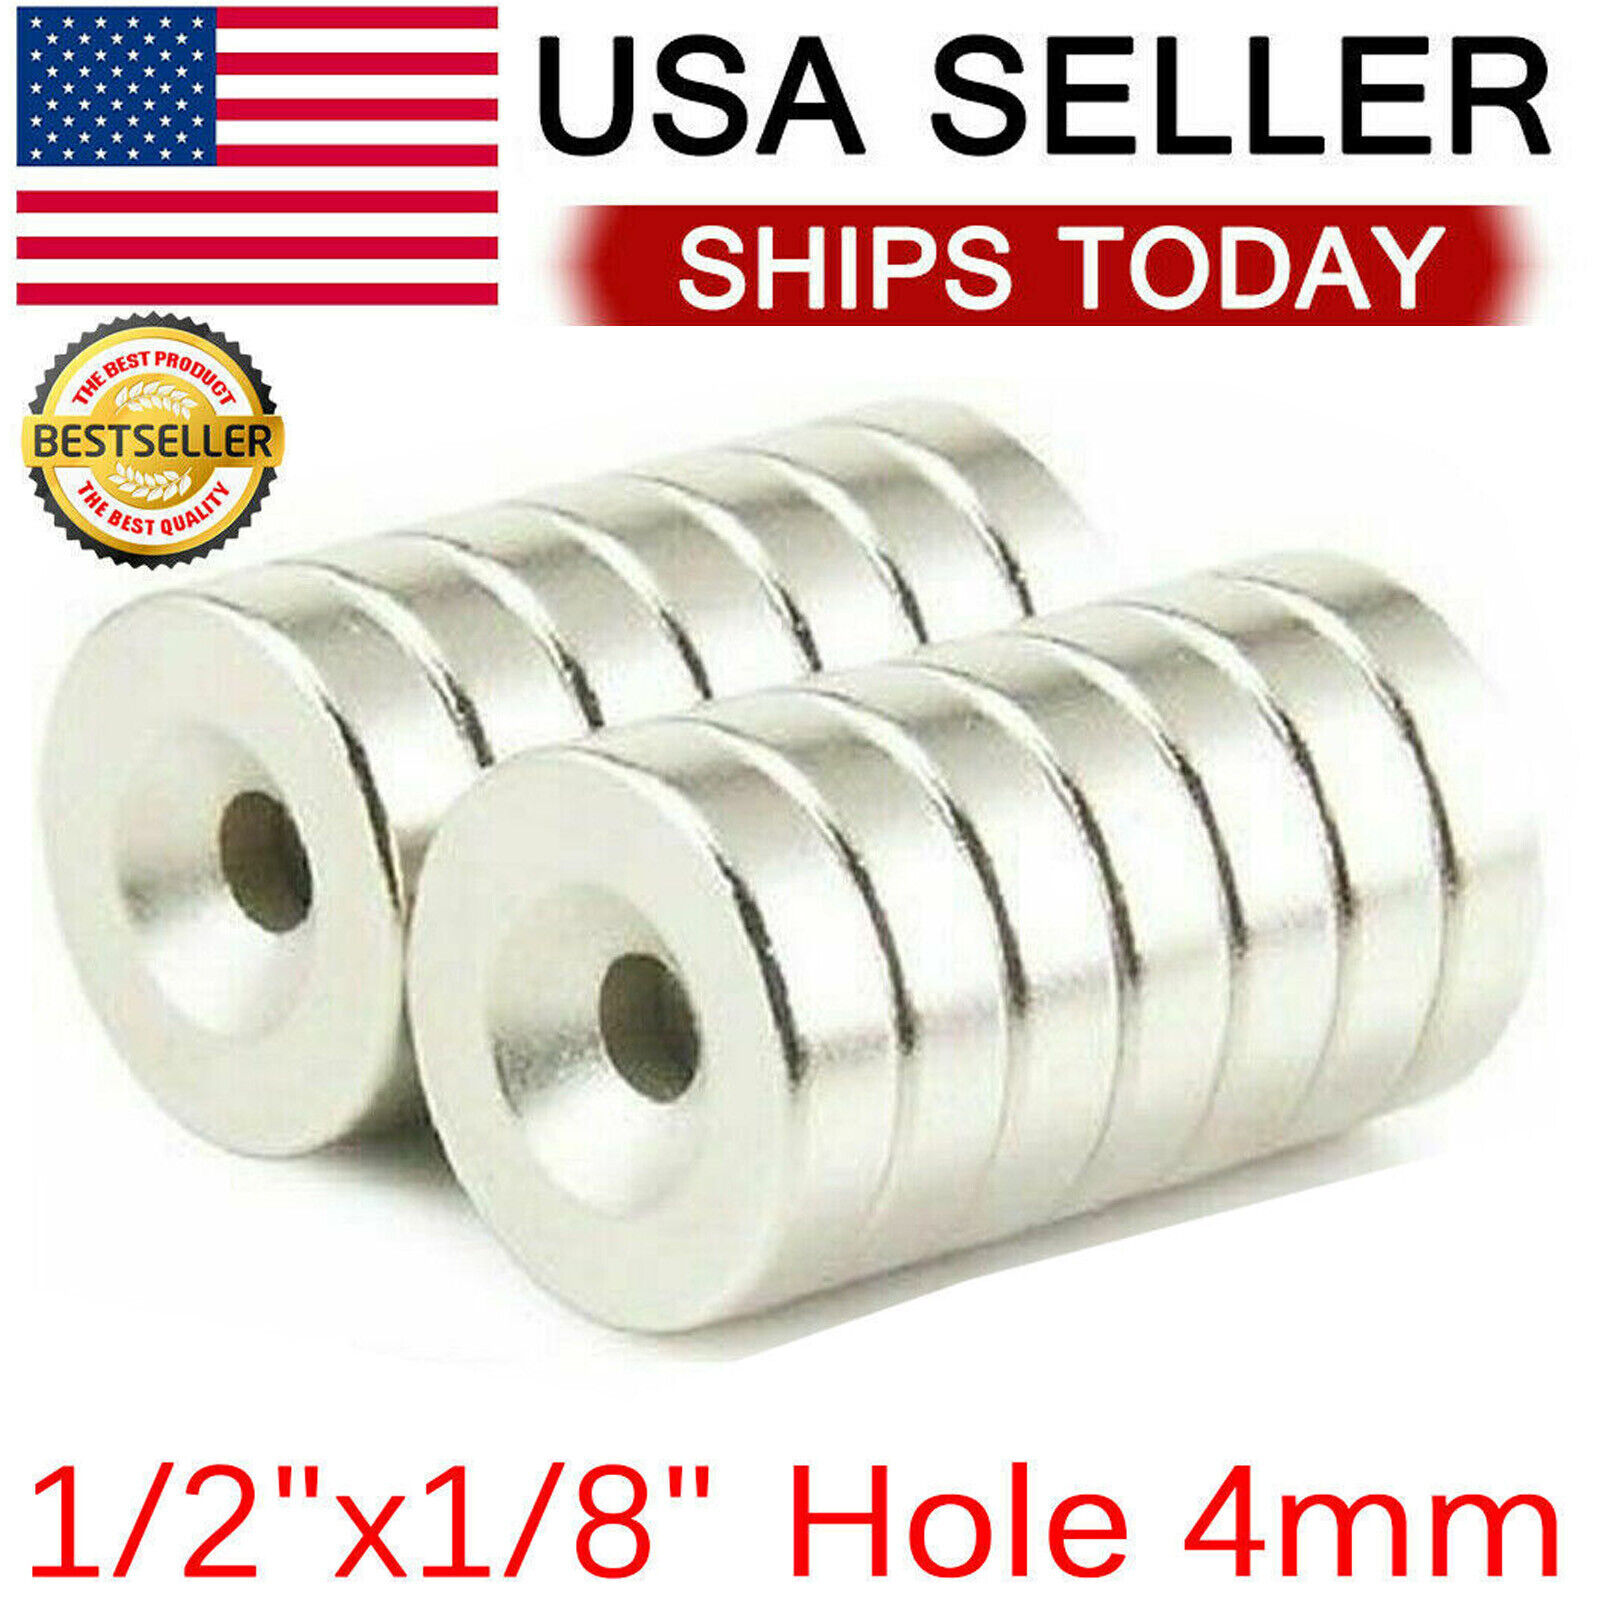 25 50 100 Strong Countersunk Ring Magnets 1/2